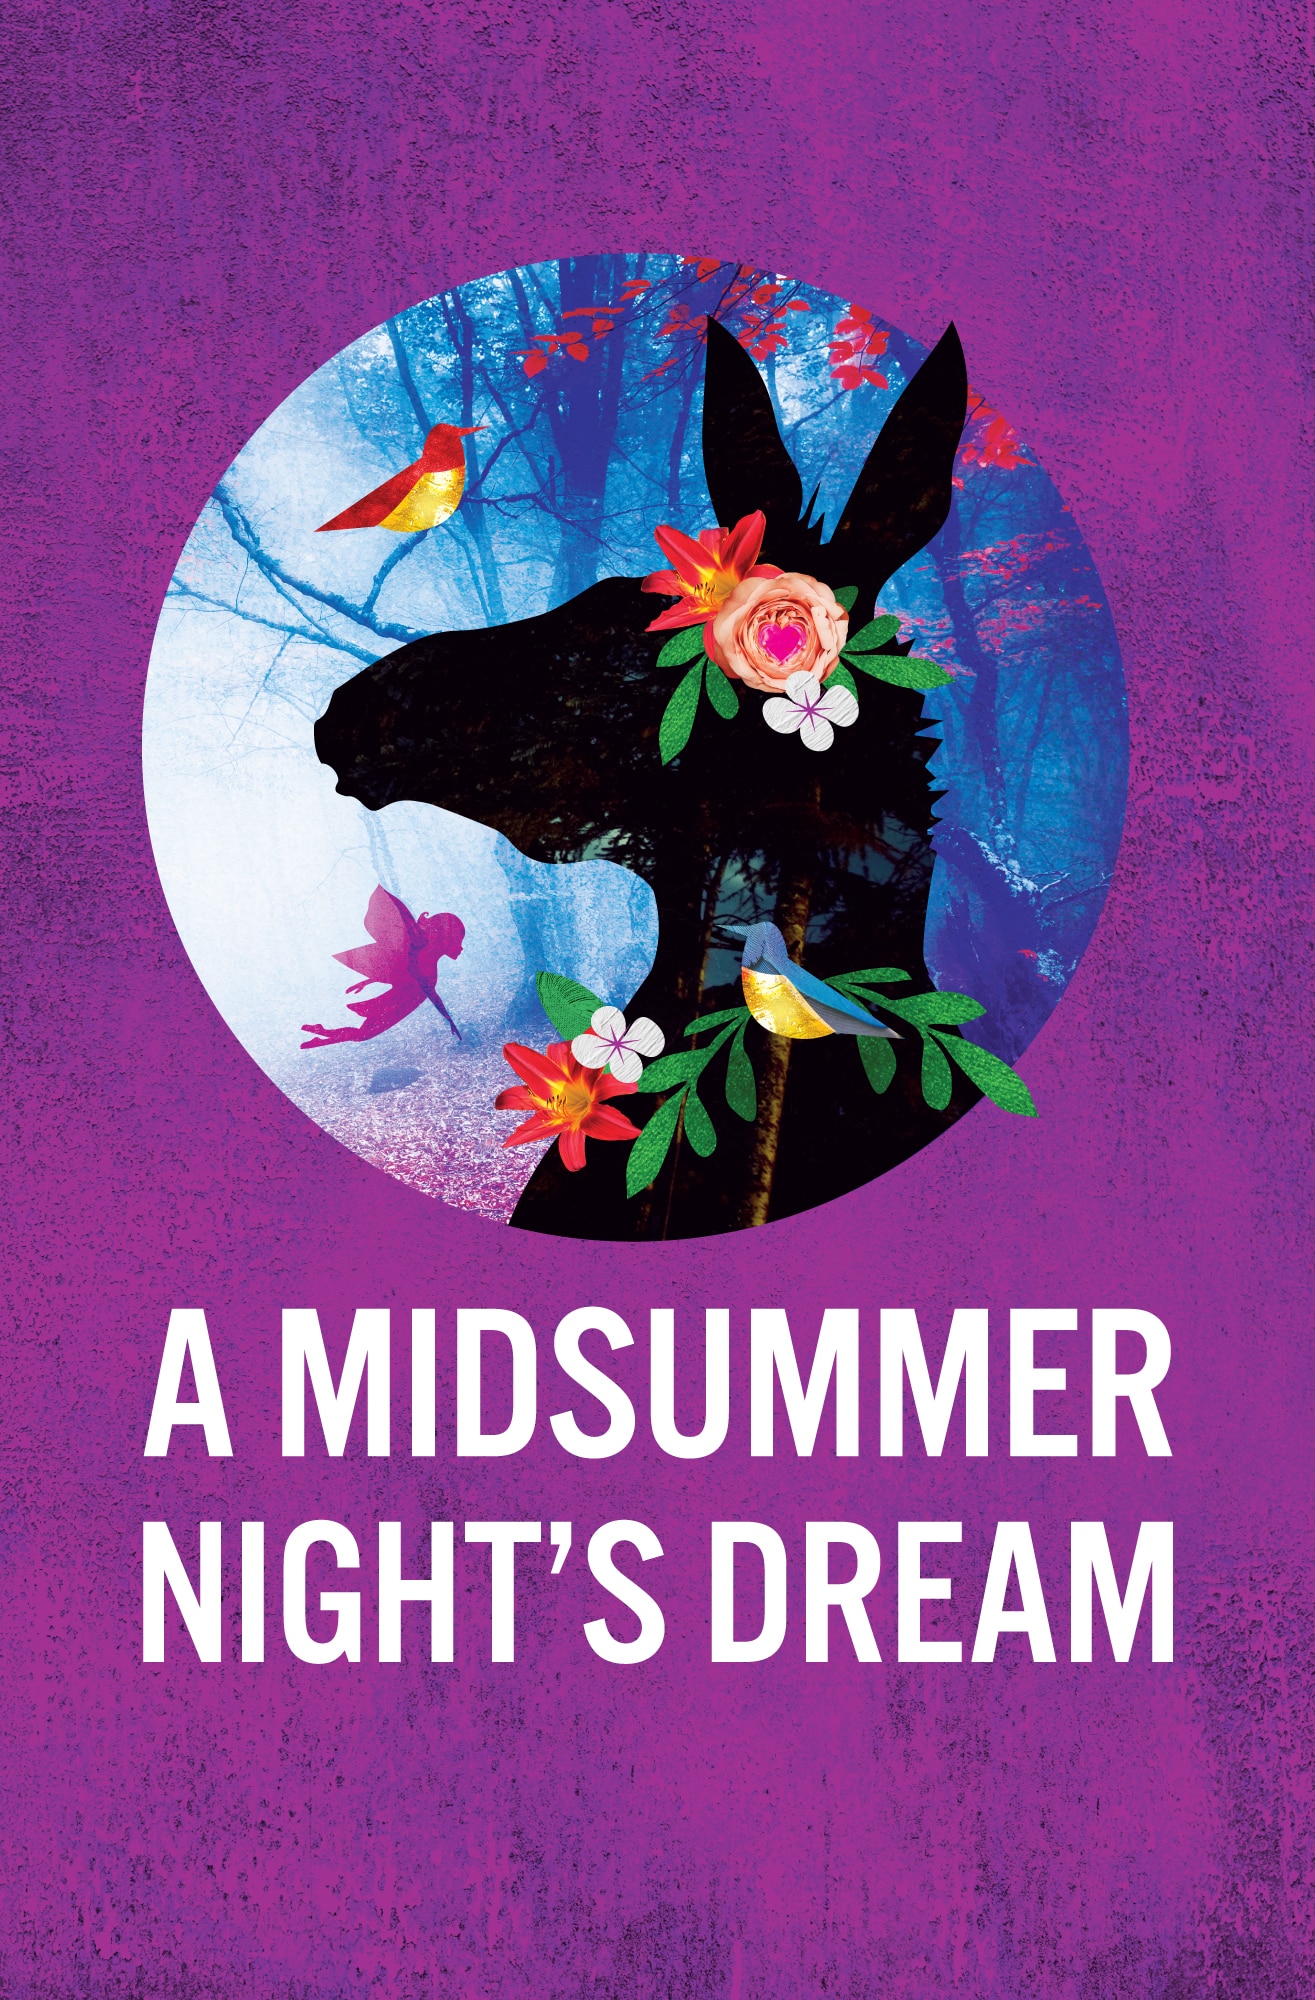 A Midsummer Night's Dream Graphic -- Links to Study Guide (when available)